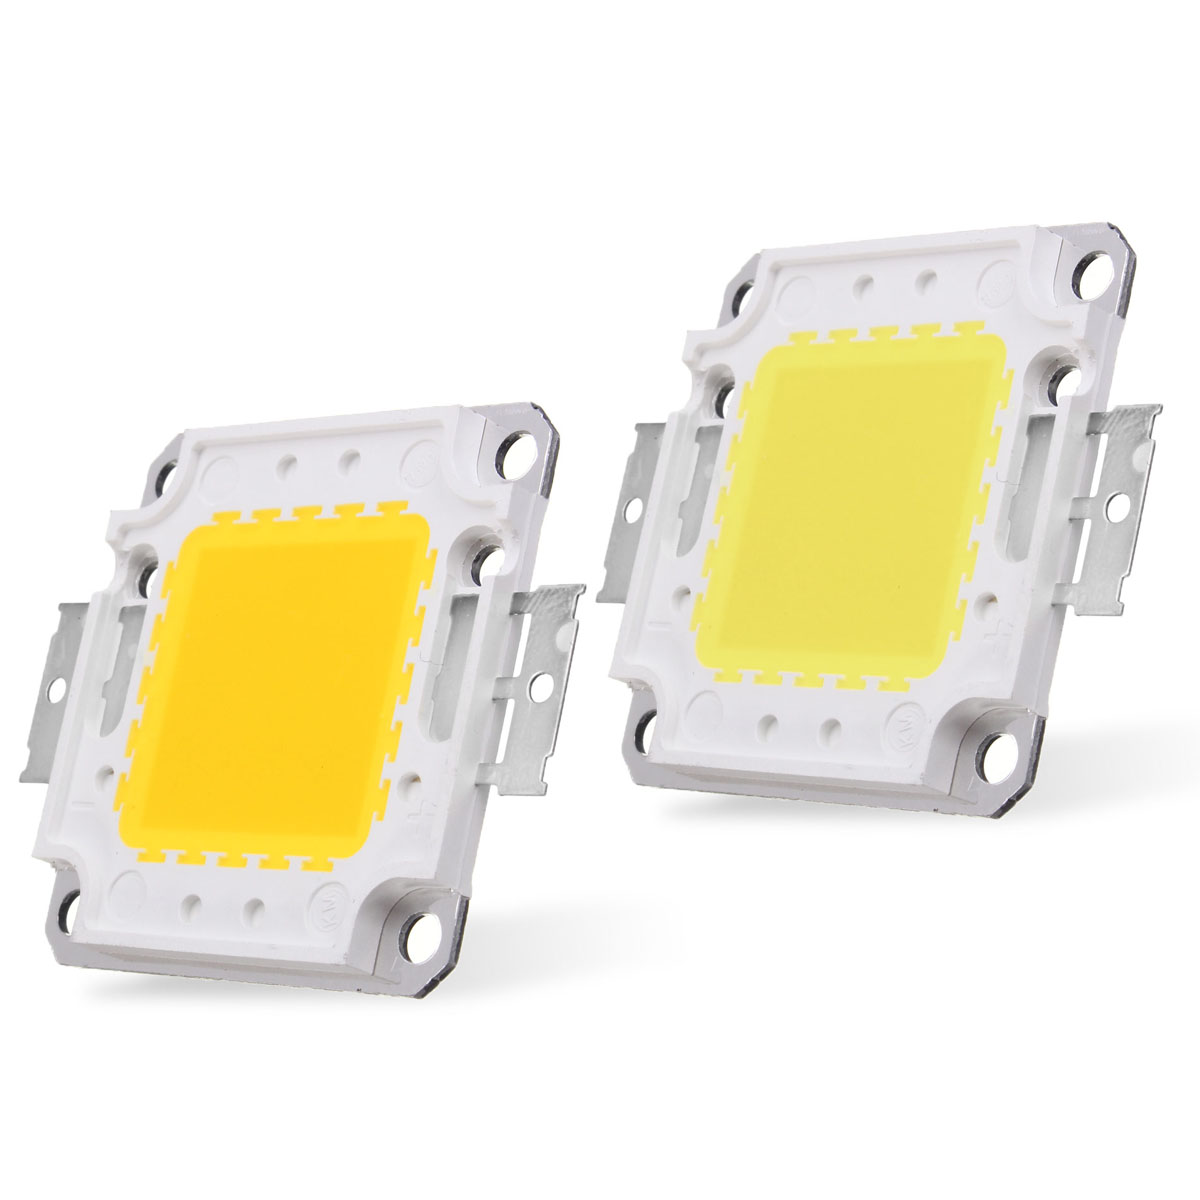 9W-Waterproof-High-Power-LED-Driver-Supply-SMD-Chip-for-Light-AC85-265V-1160499